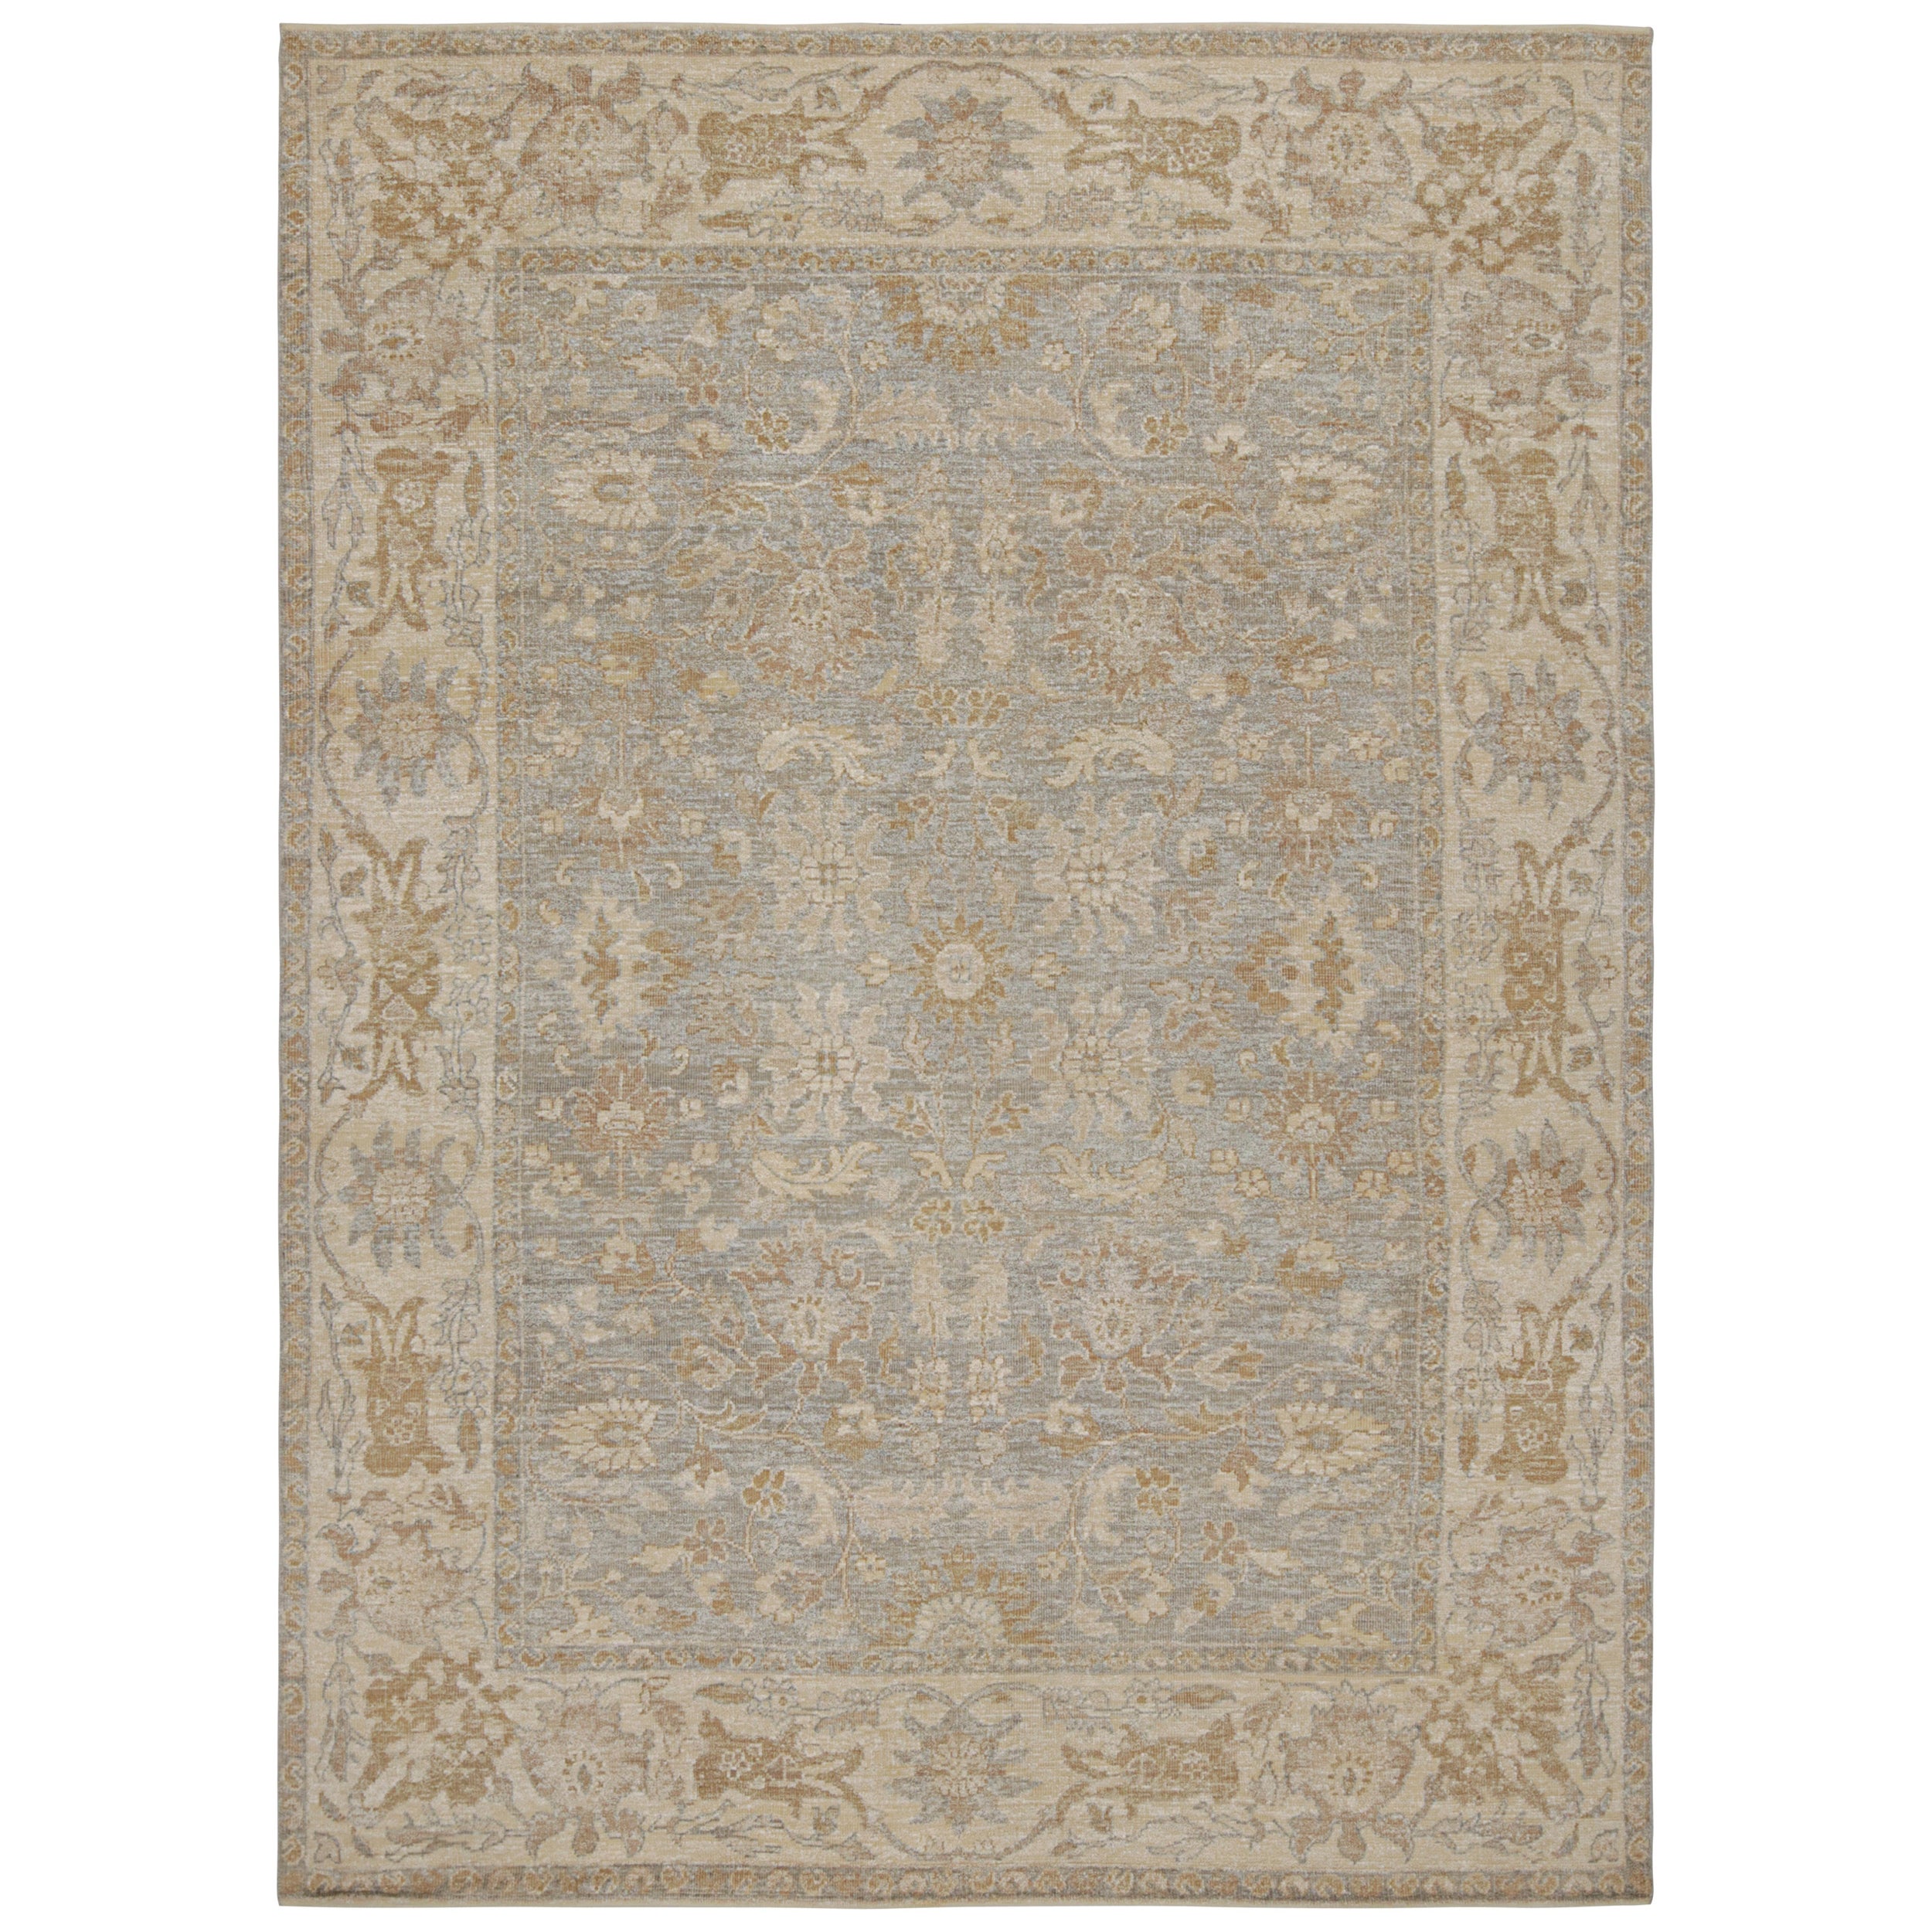 Rug & Kilim’s Oushak Style Rug In Beige/Brown With All Over Floral Patterns